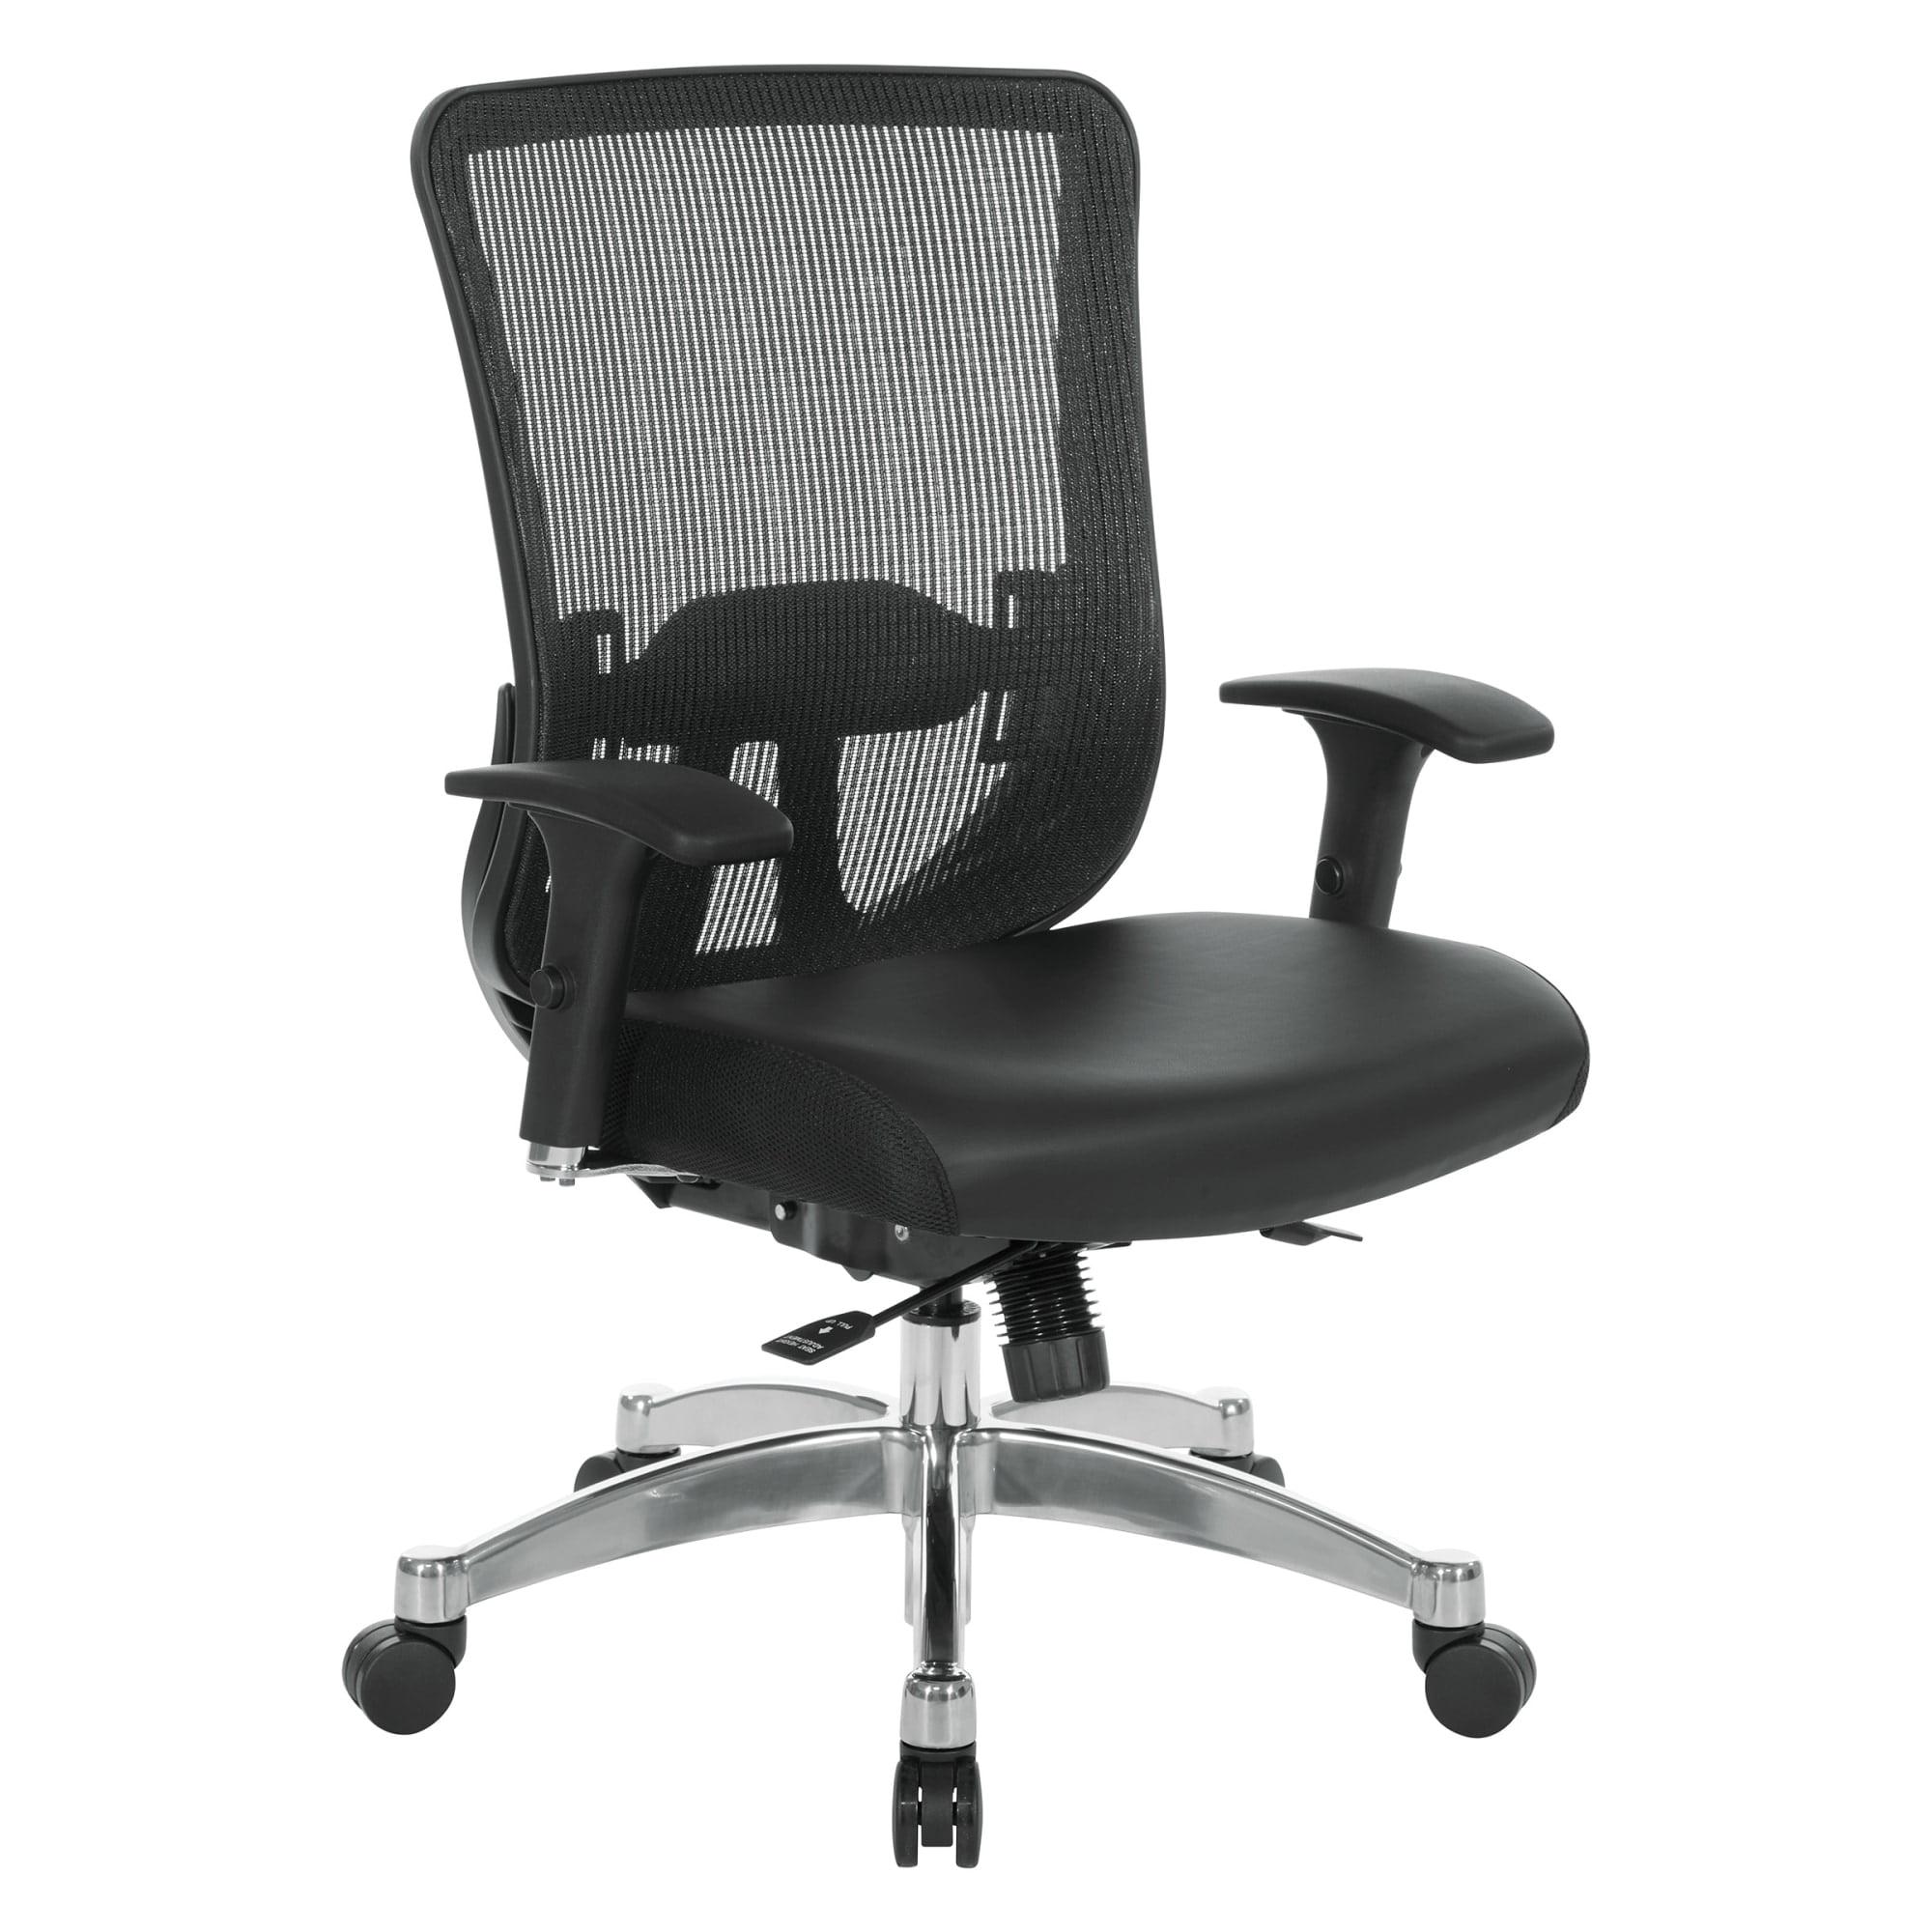 Executive Black Mesh and Leather Swivel Office Chair with Adjustable Arms